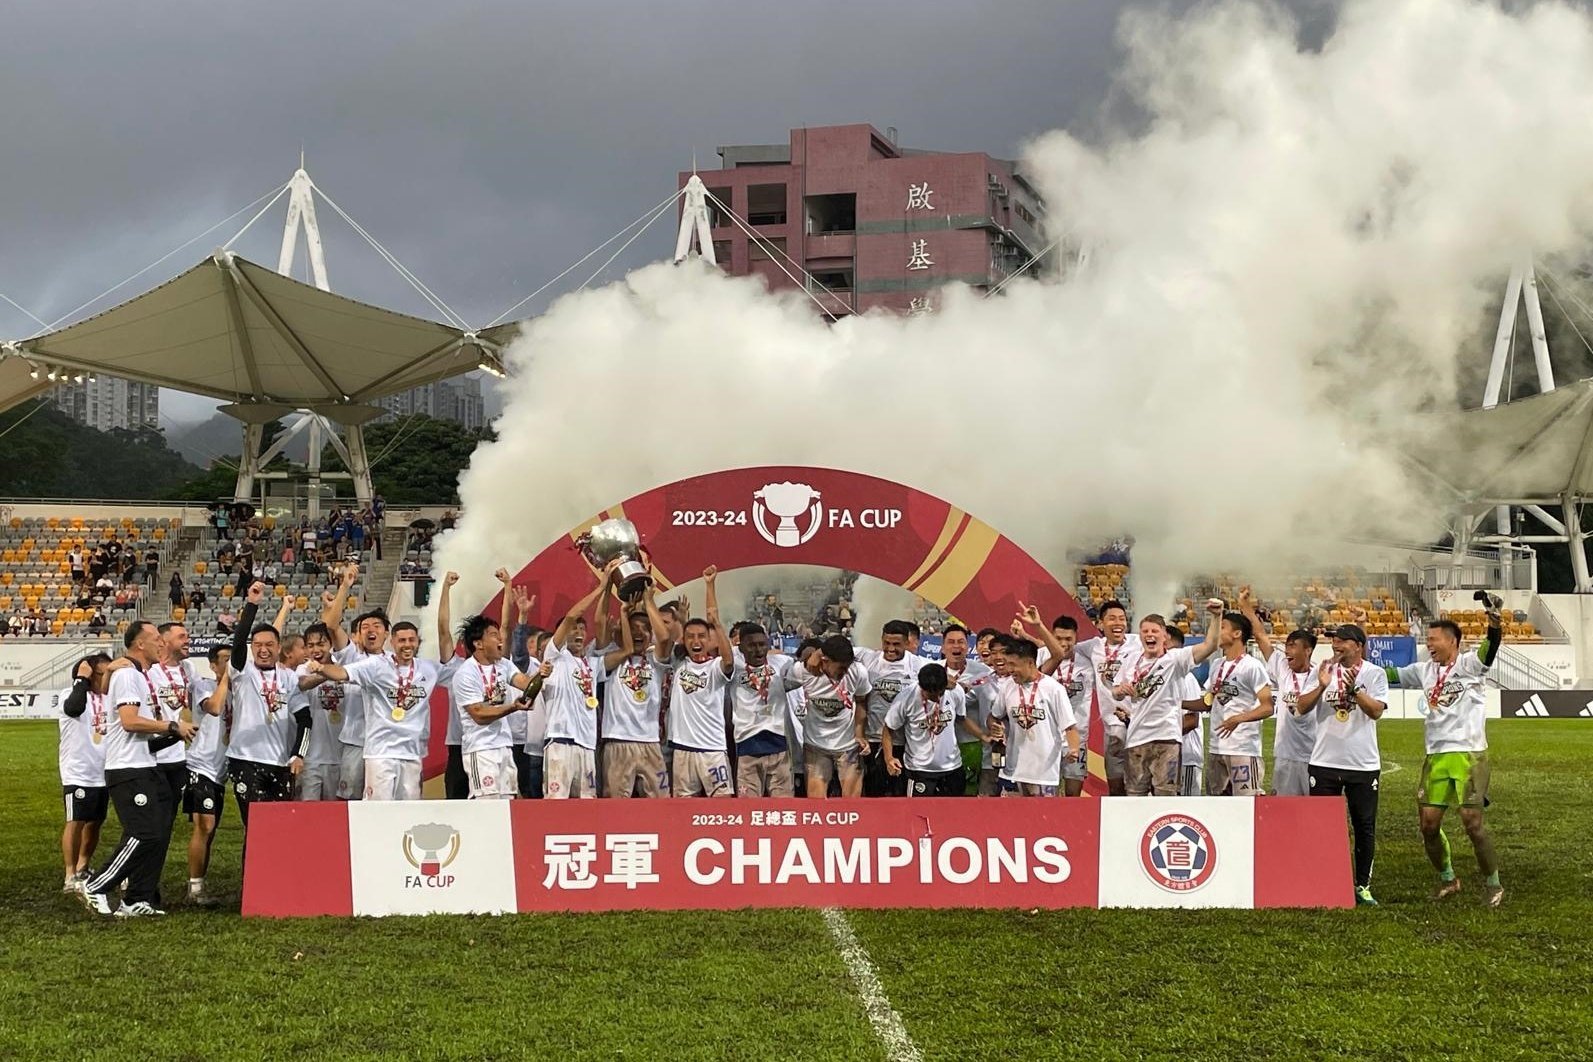 Eastern celebrate winning the FA Cup for a sixth time. Photo: Mike Chan